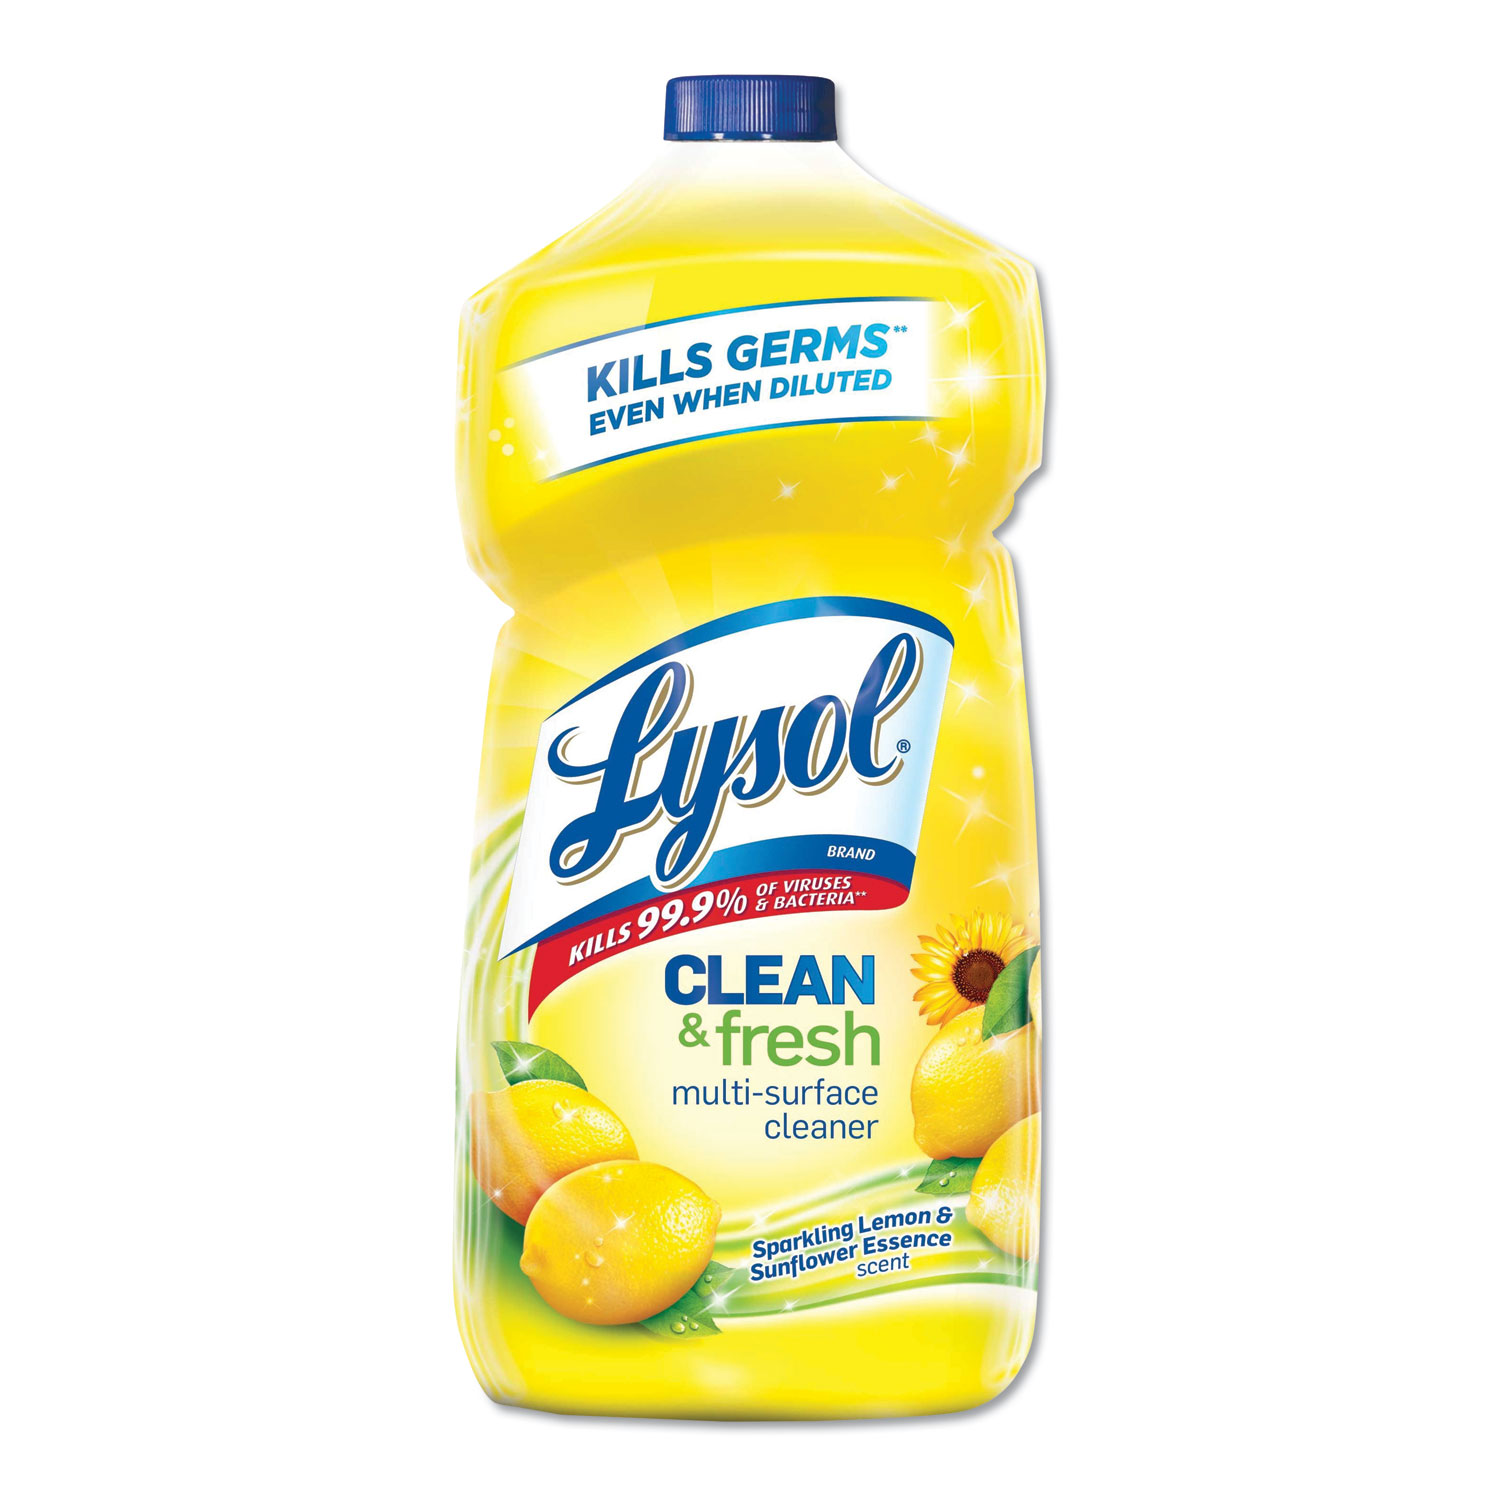 Lysol Clean and Fresh MultiSurface Cleaner - Sparkling Lemon and Sunflower Essence, 40 oz, 9/Case